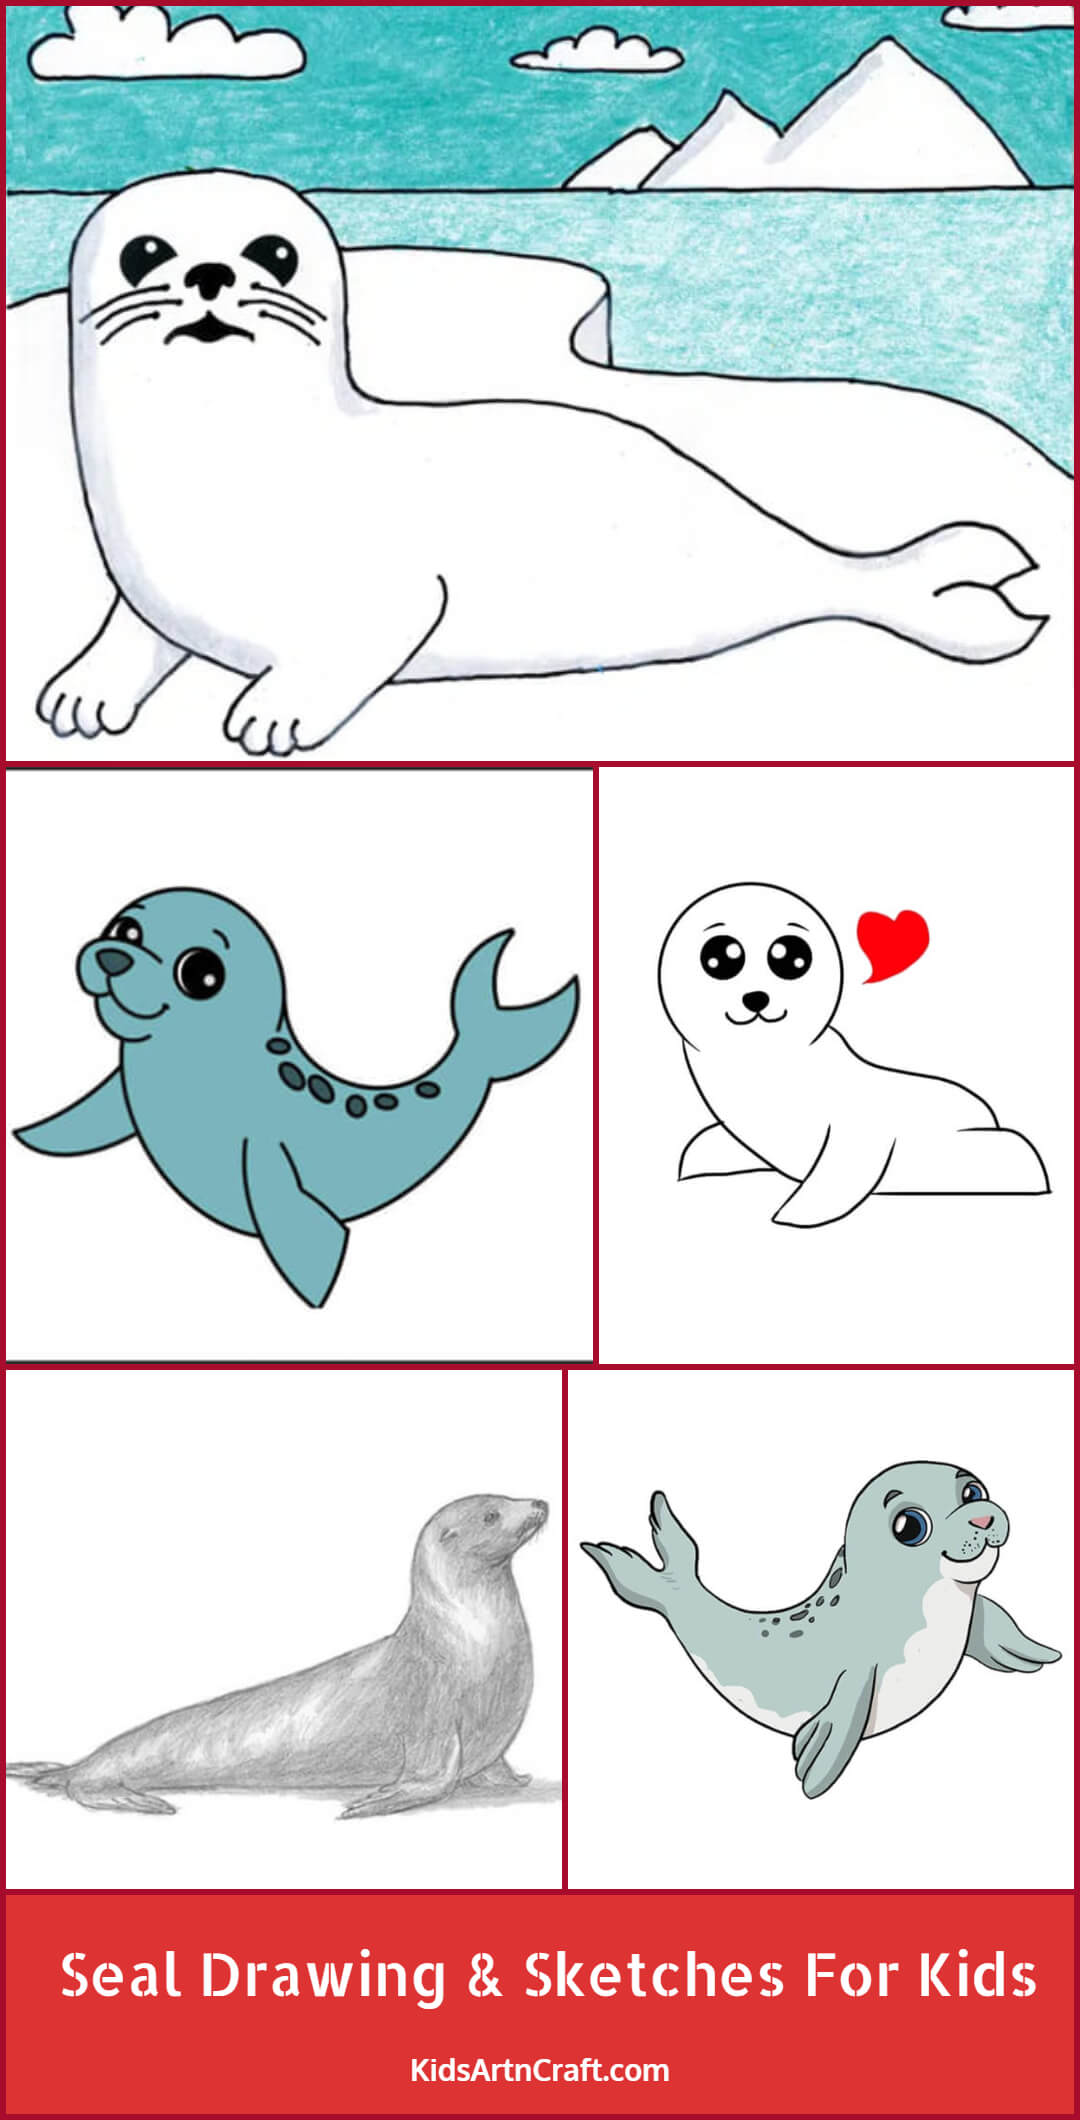 Seal Drawing & Sketches For Kids